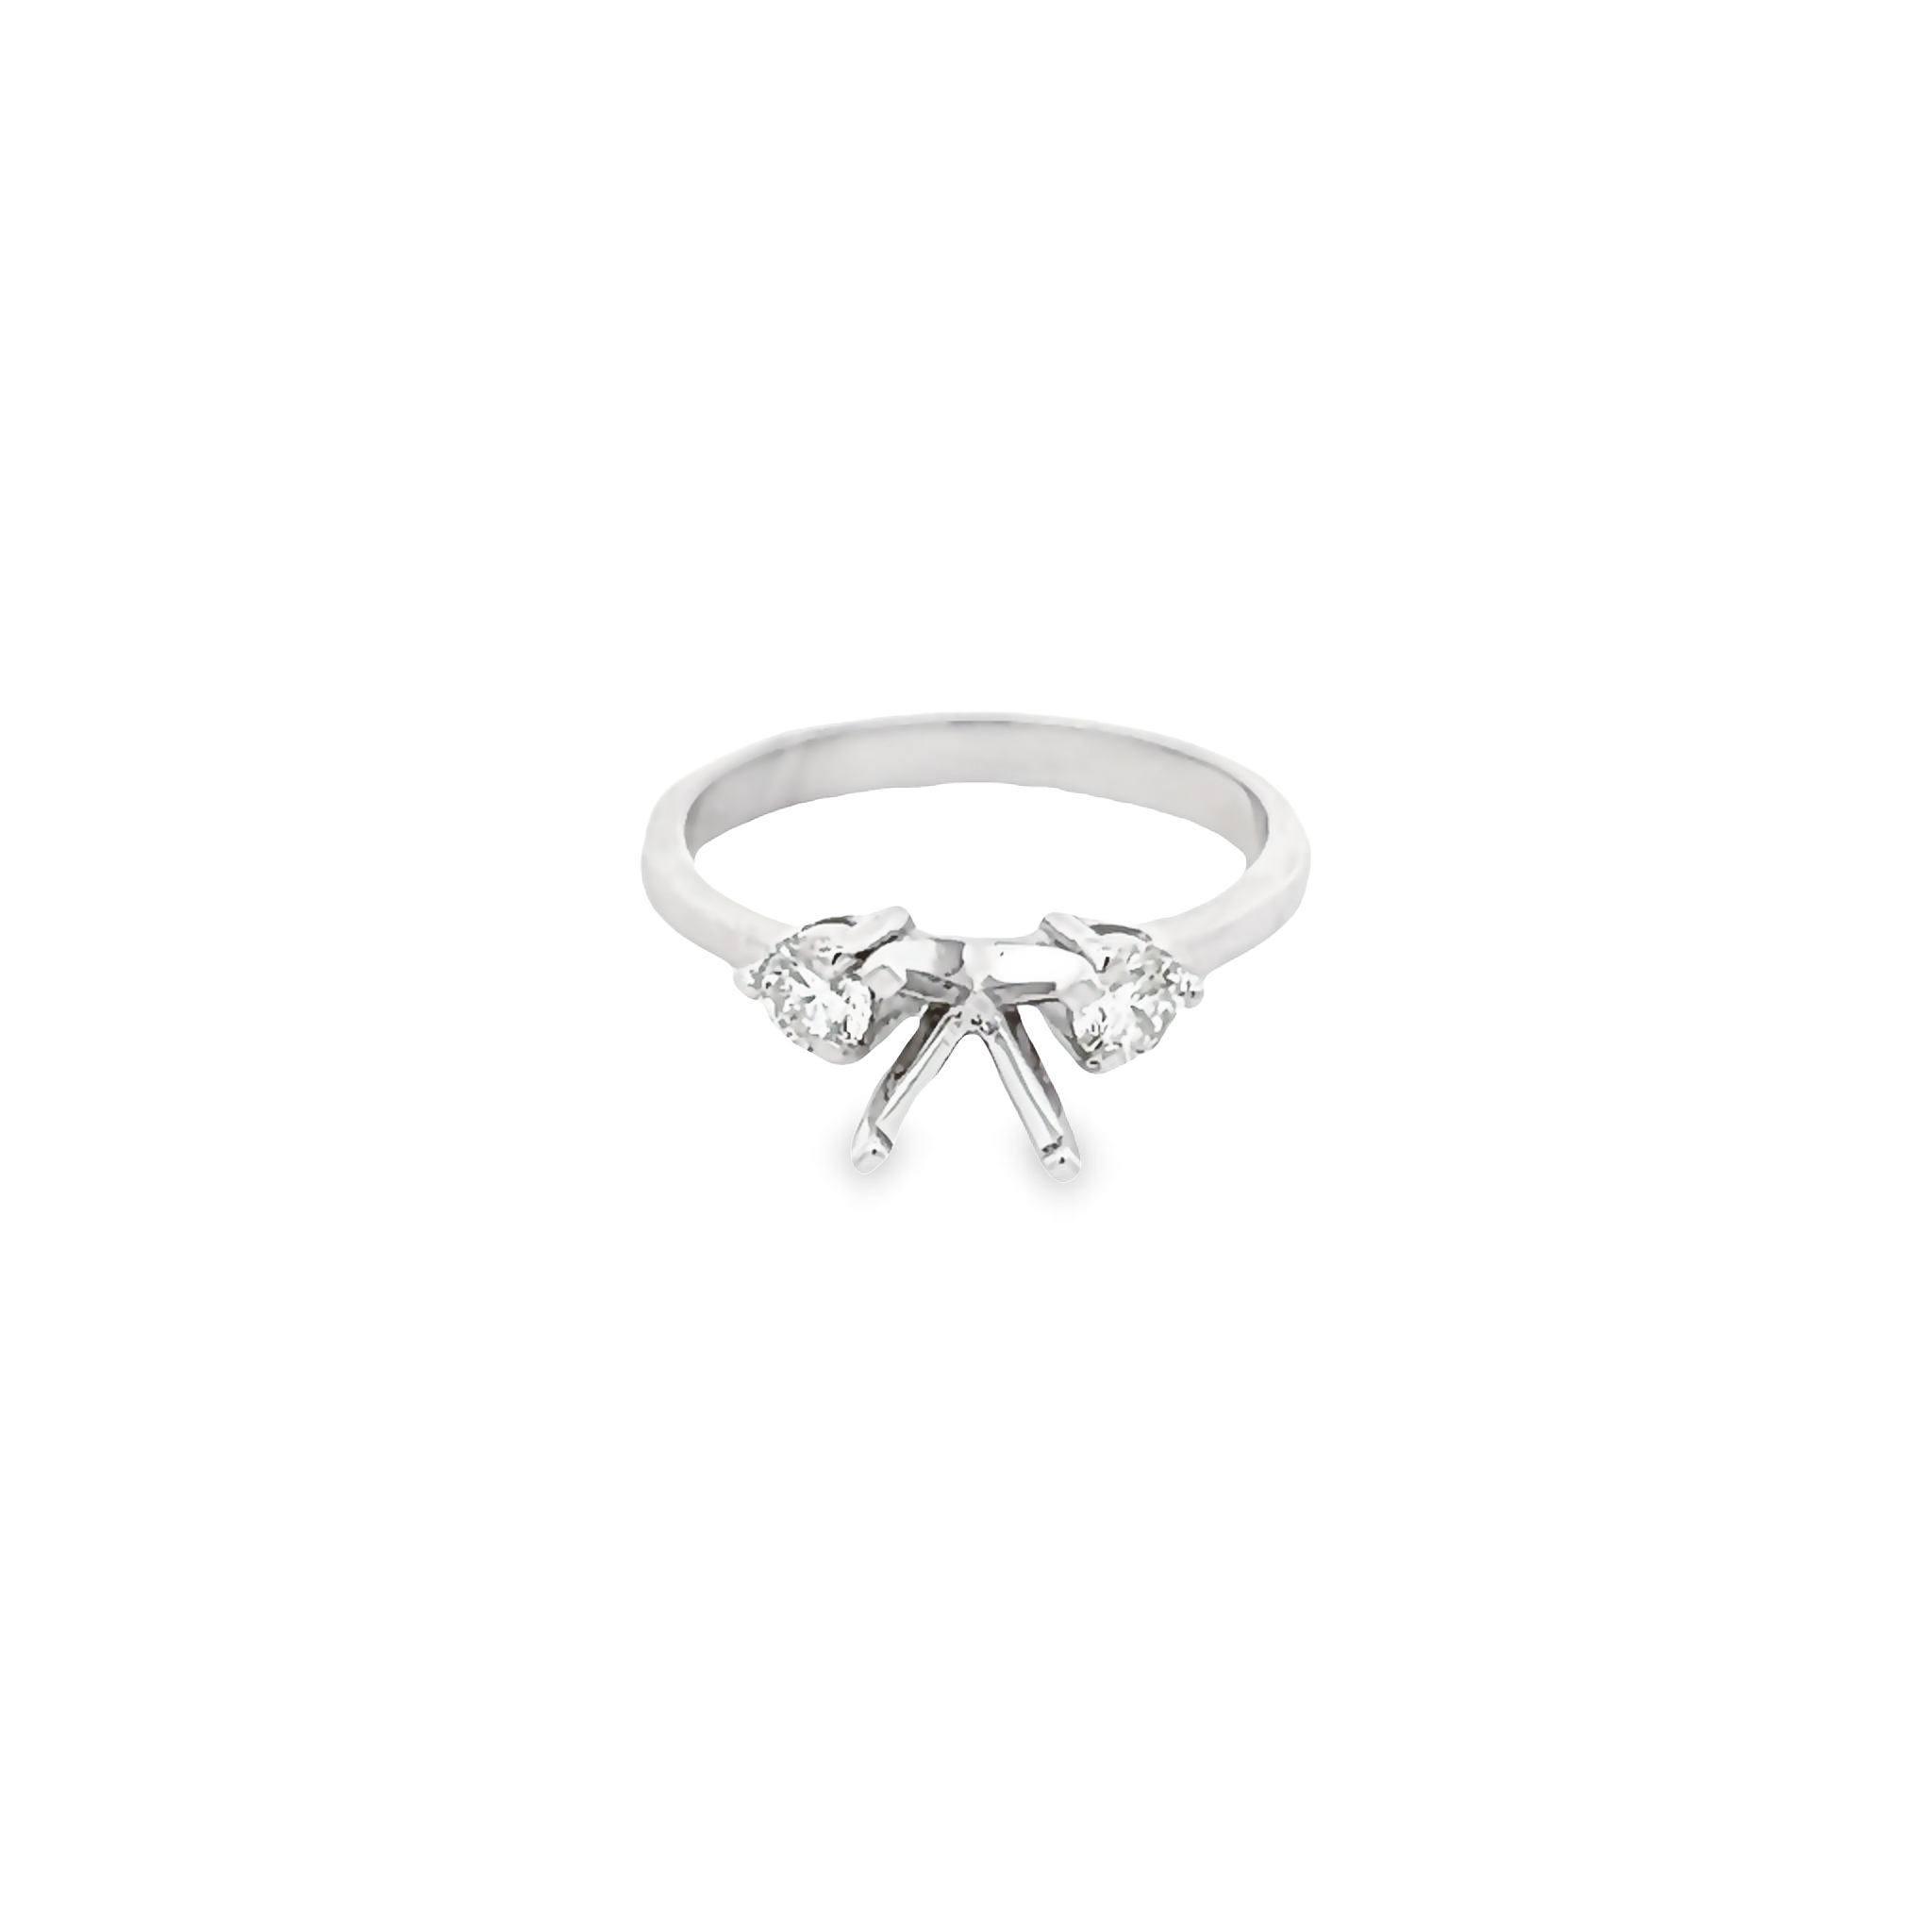 14 Karat White Gold Semi Mount Engagement Ring With 2=0.38 Total Weight Round Brilliant G Vs Diamonds. Size 6.25